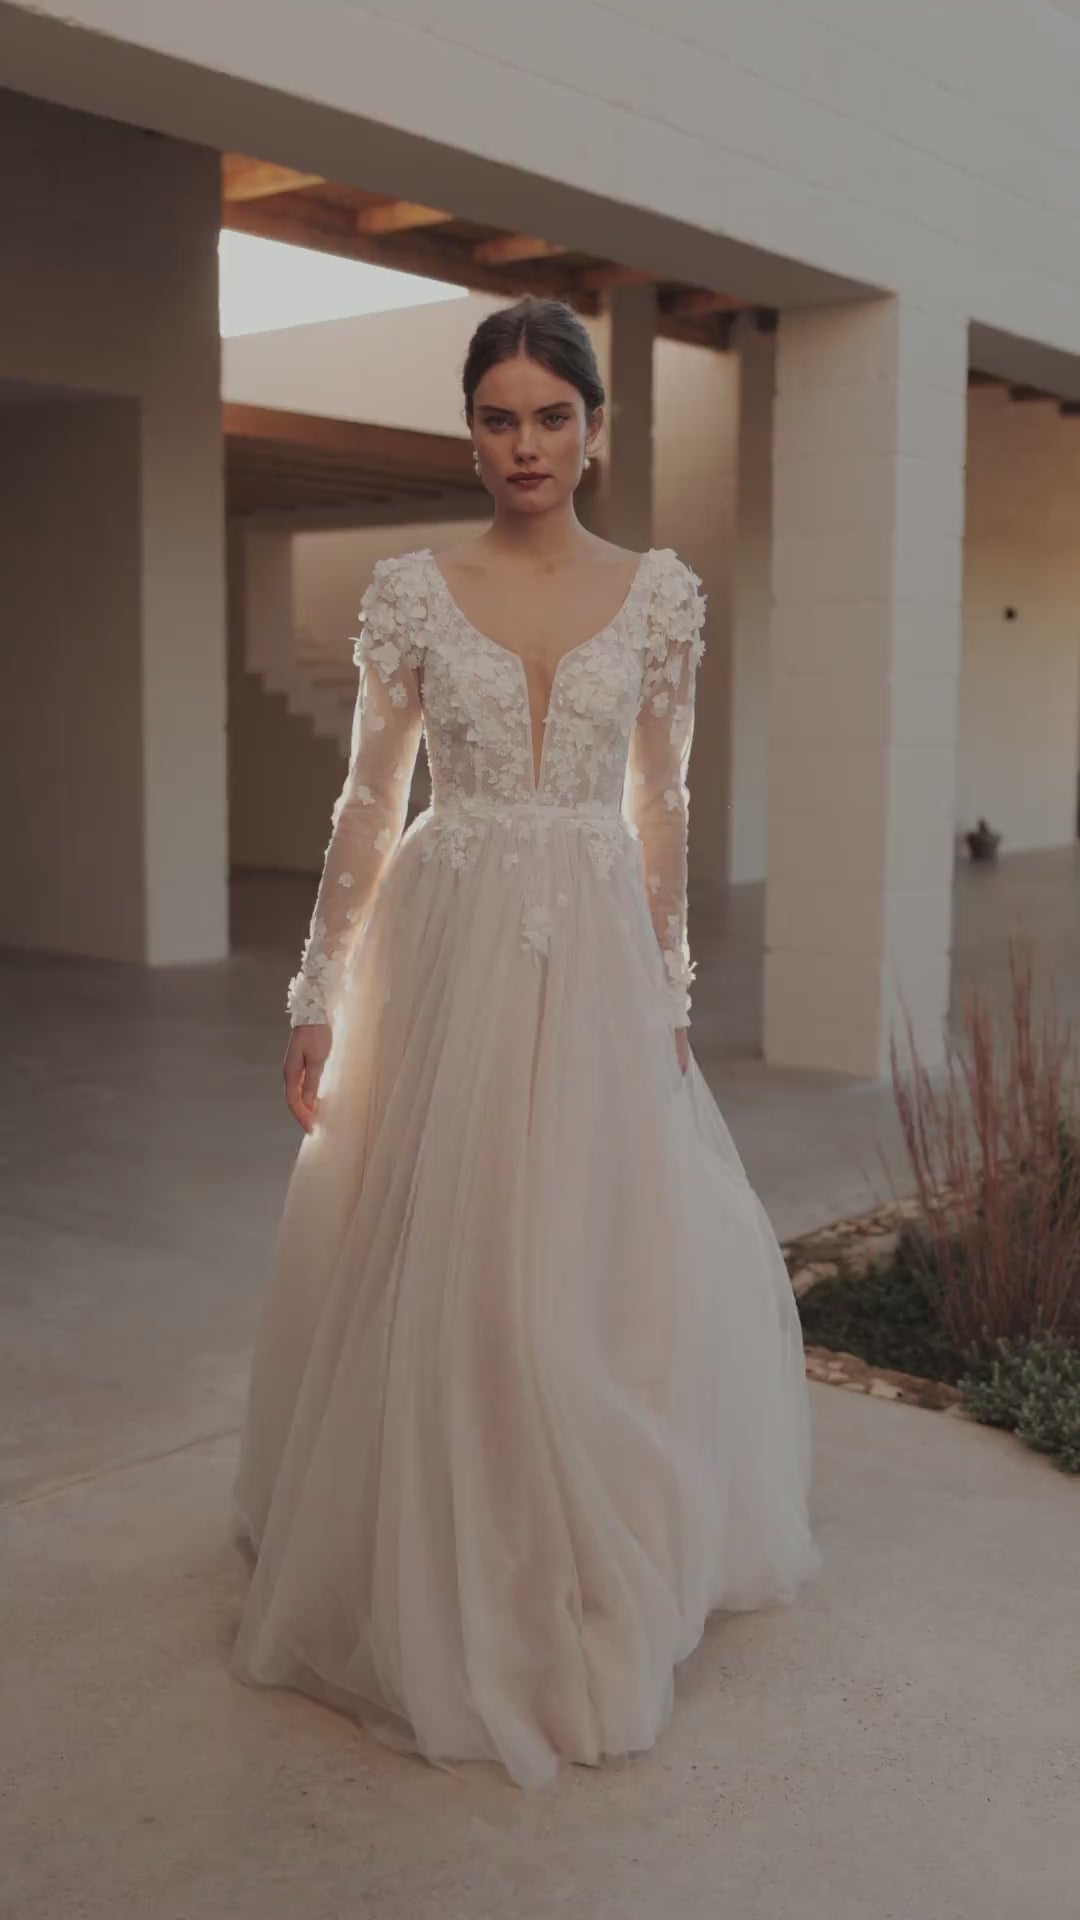 Enchanted Floral Appliqué Wedding Dress with Plunging Neckline and Sheer Sleeves Plus Size